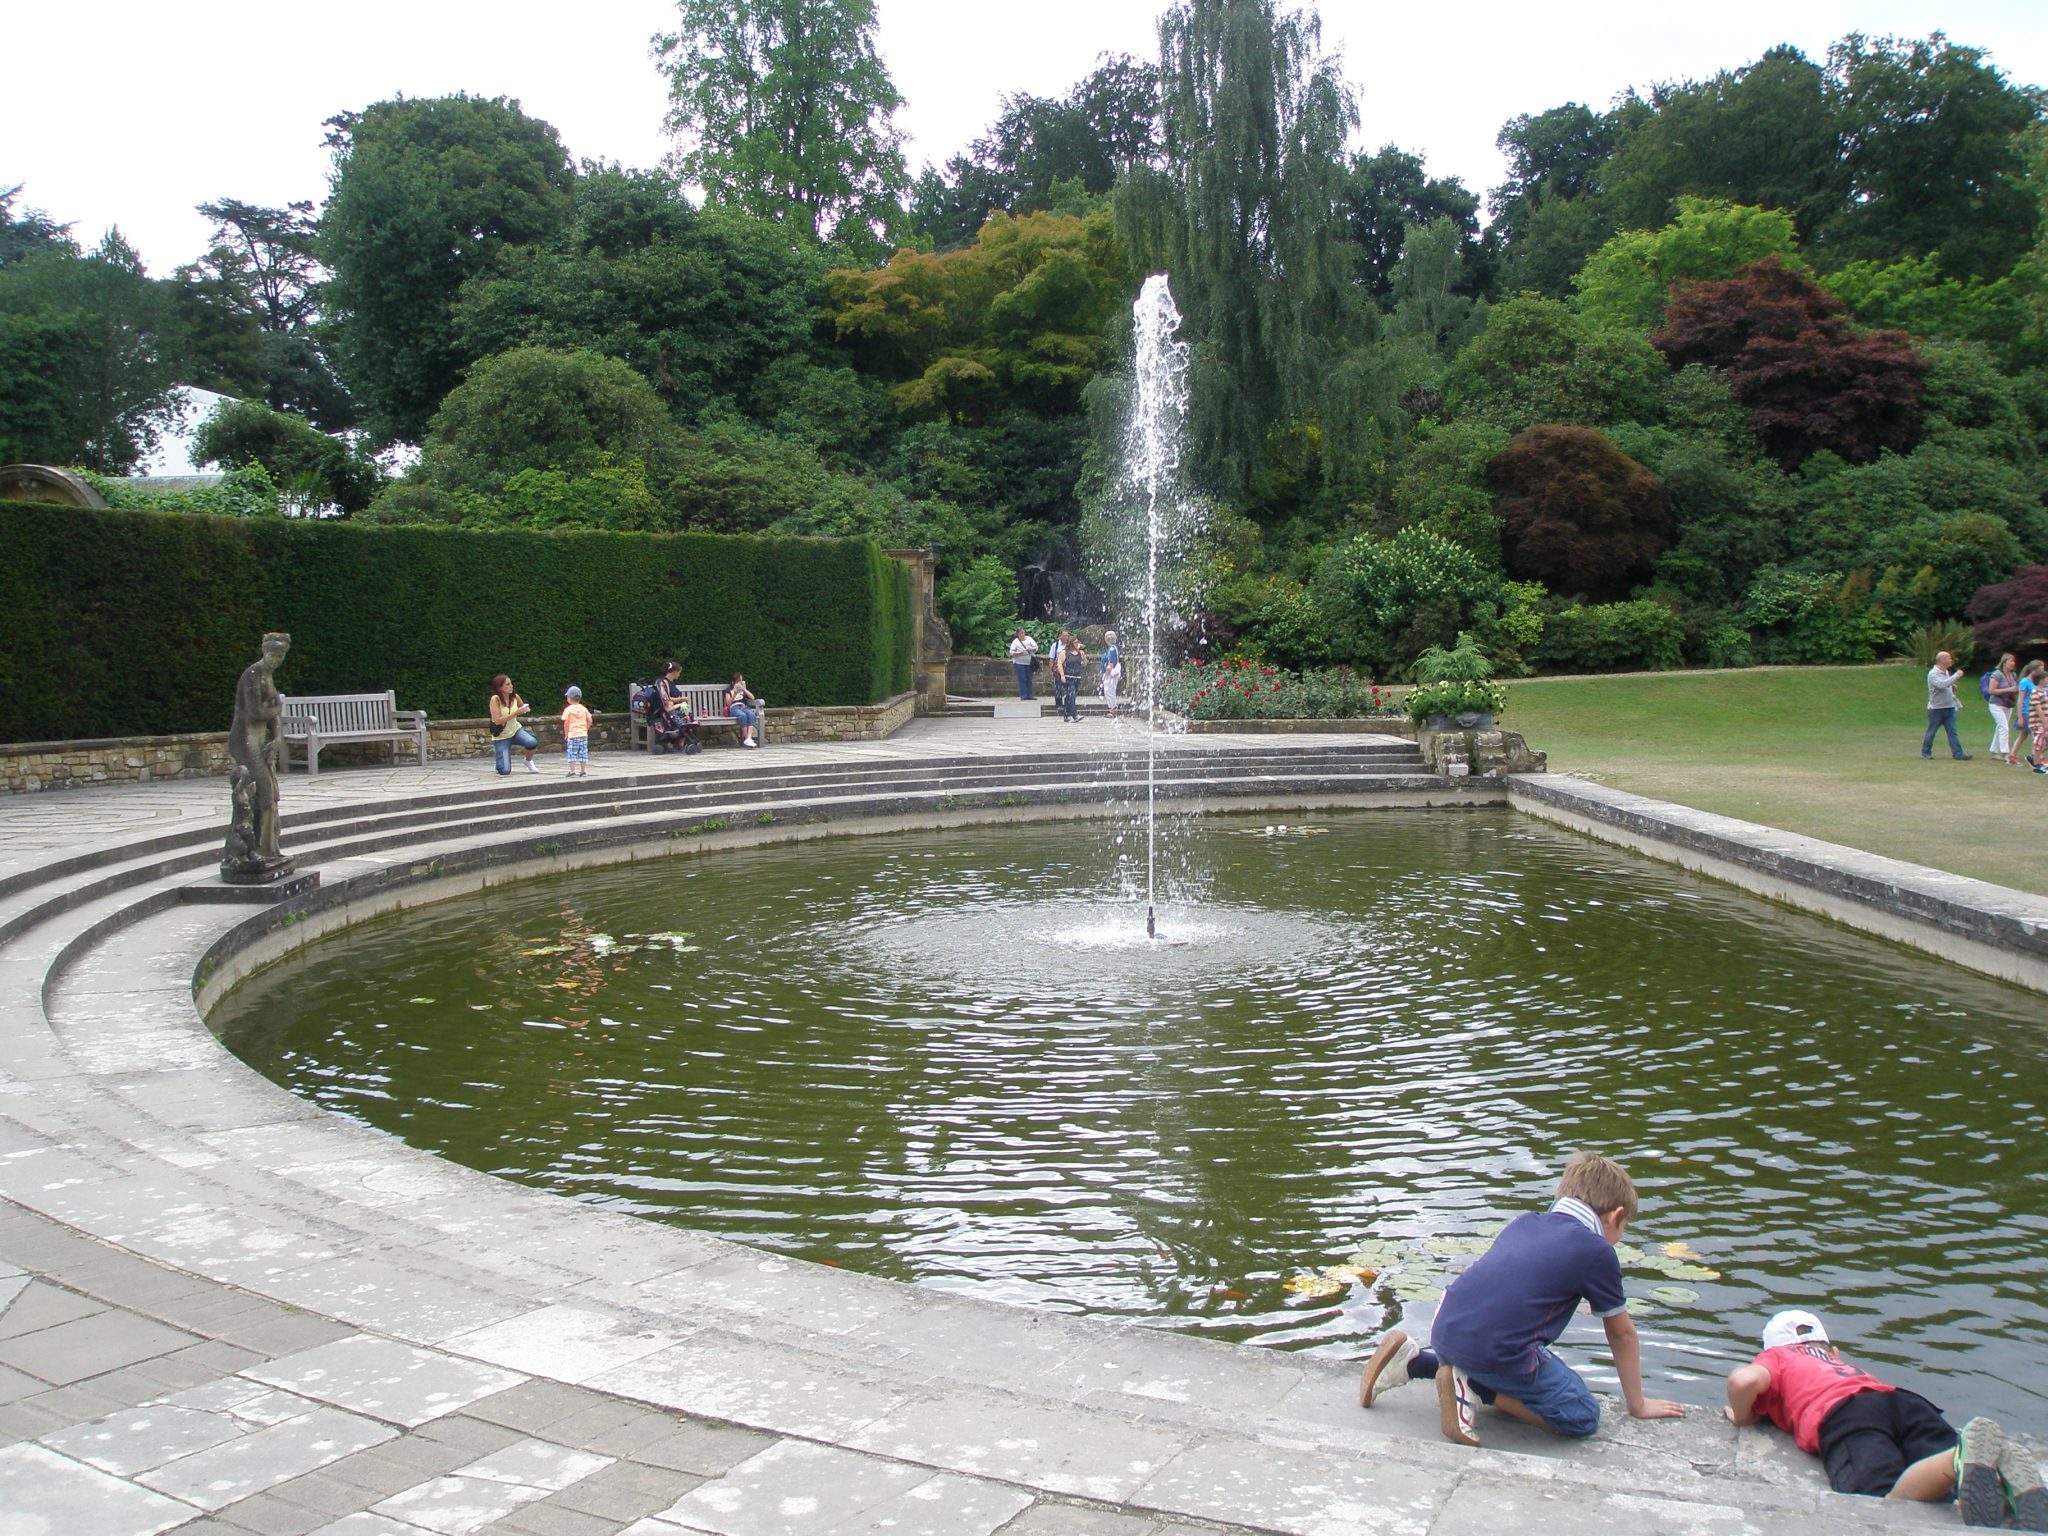 A Half Moon Pond is at the western end of the Italian Garden